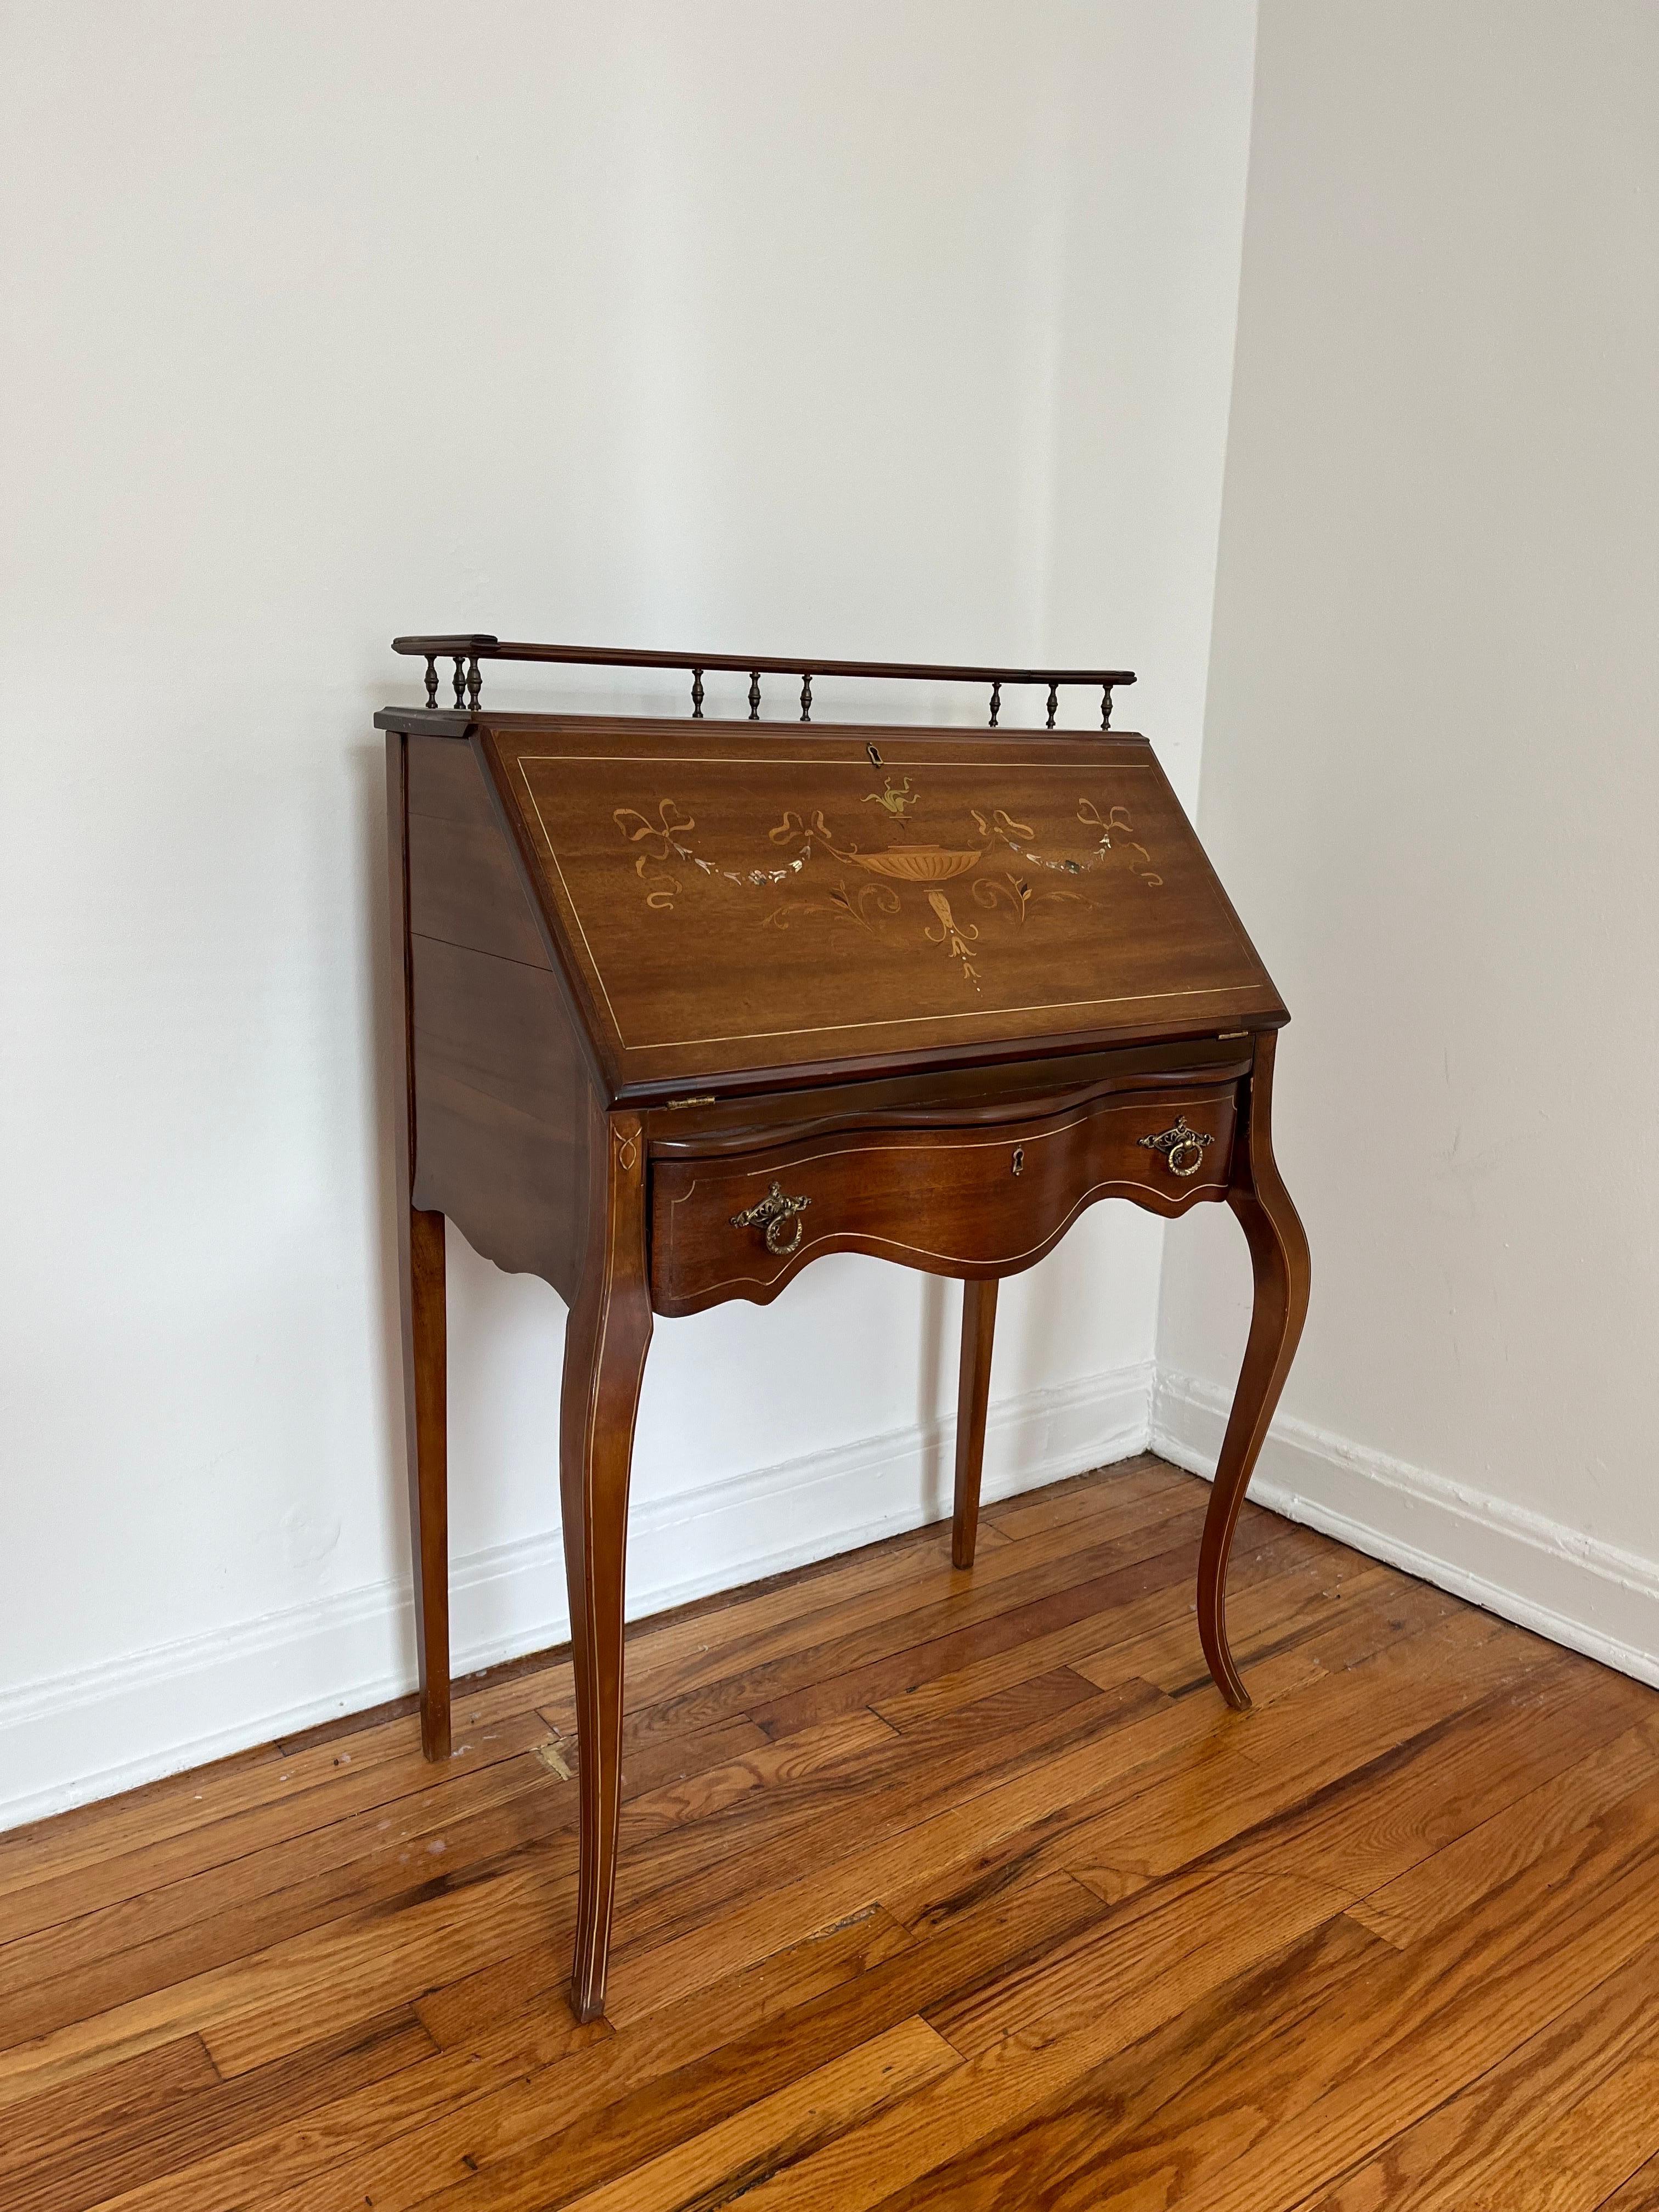 French Provincial French Inlay Slant Front Writing Desk For Sale